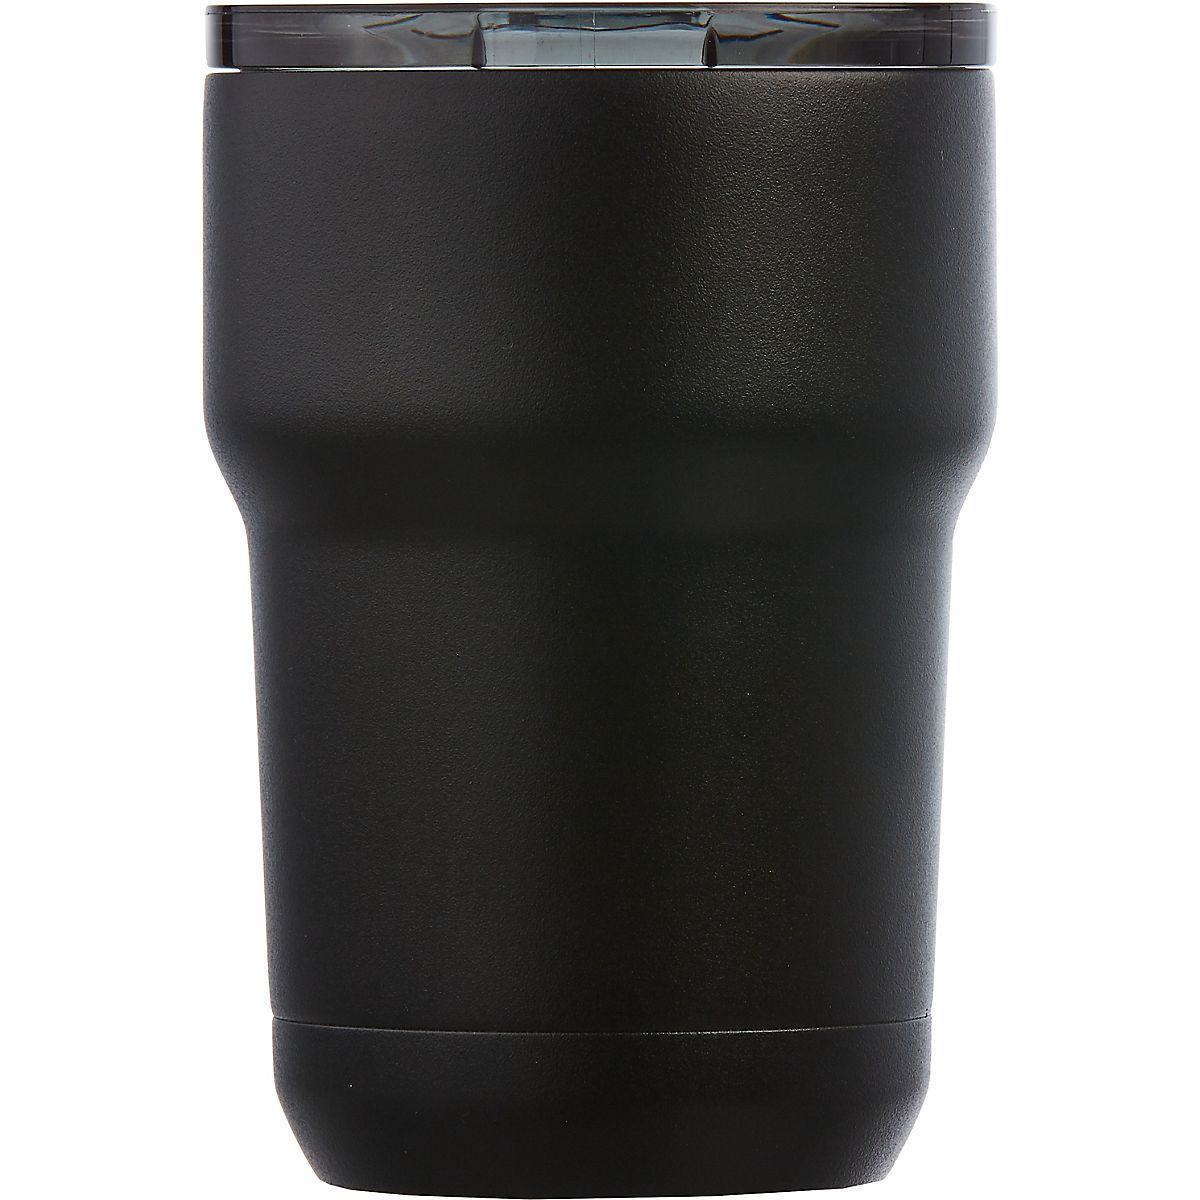 Magellan Outdoors Throwback Camouflage 30 oz Tumbler with Lid